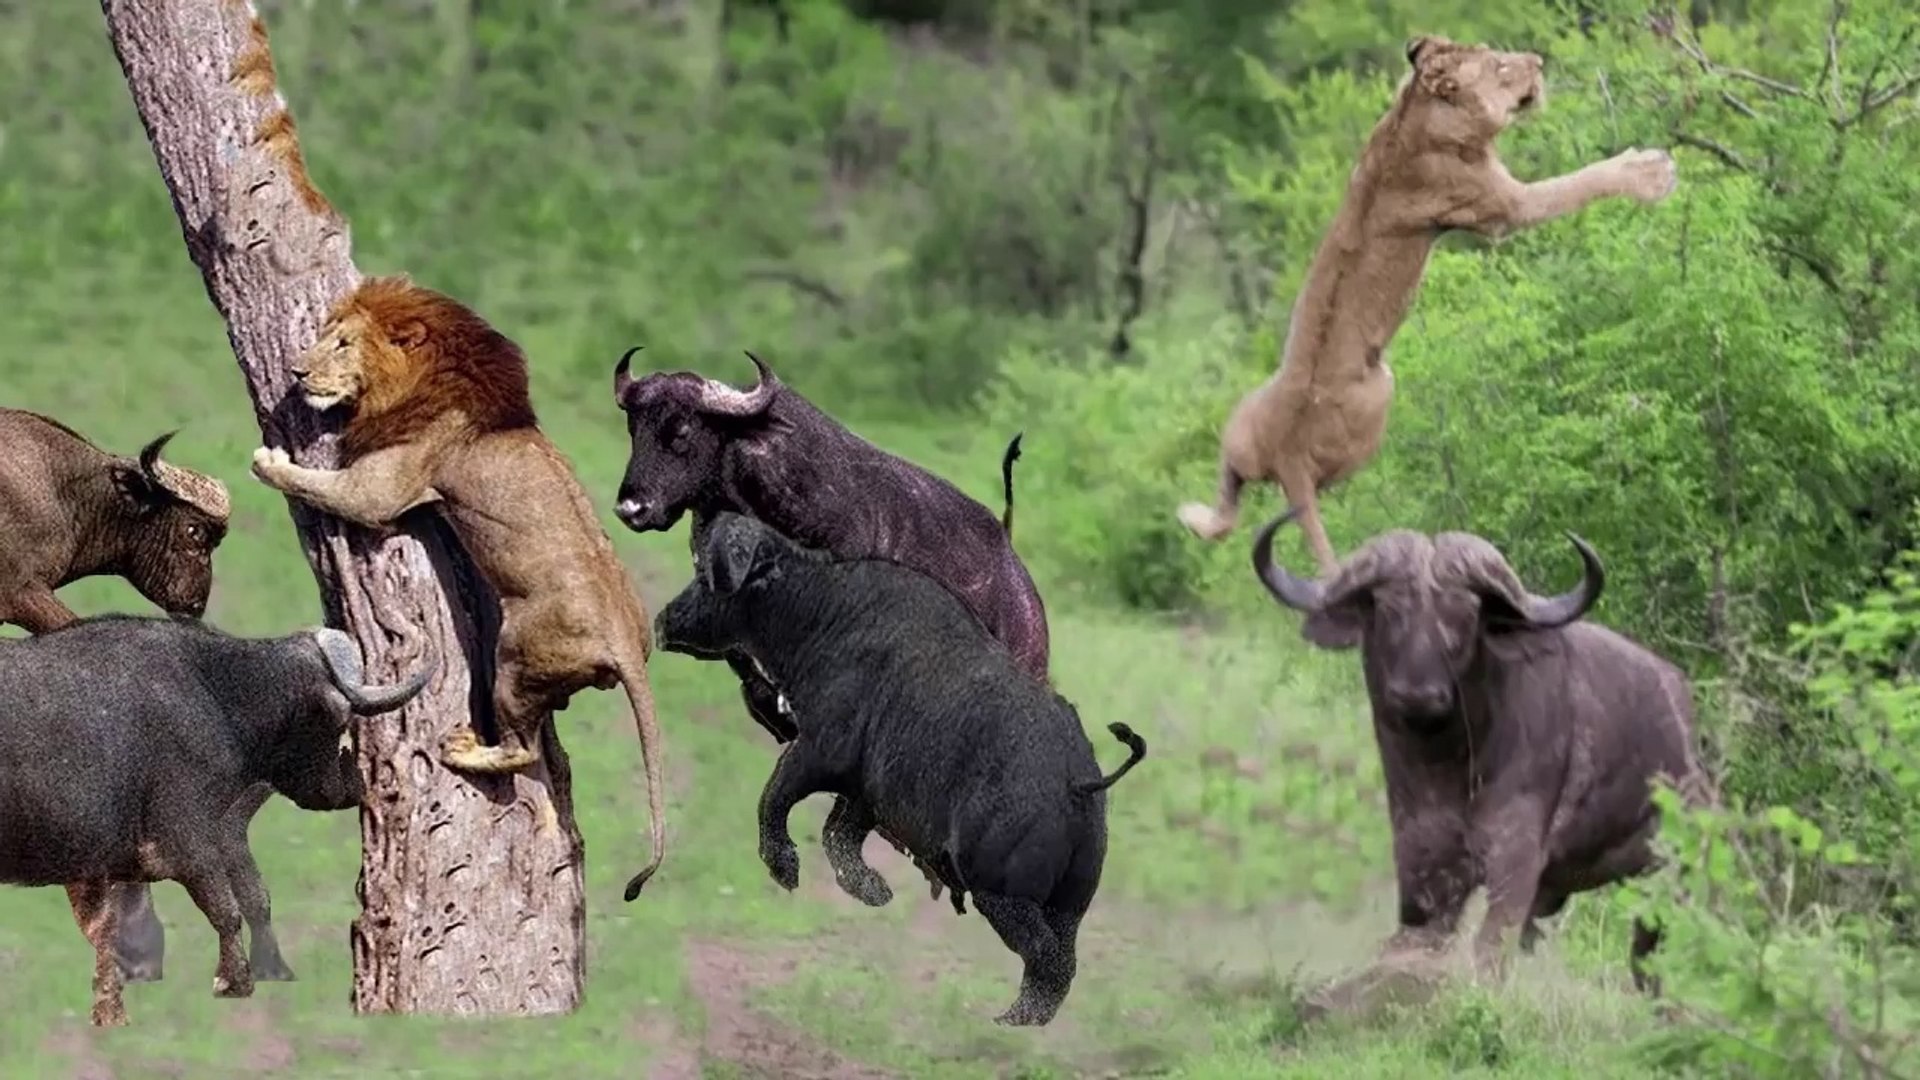 PREDATOR BECOMES THE PREY - Buffalo Herd Flick Lion Into Air To Rescue Warthog